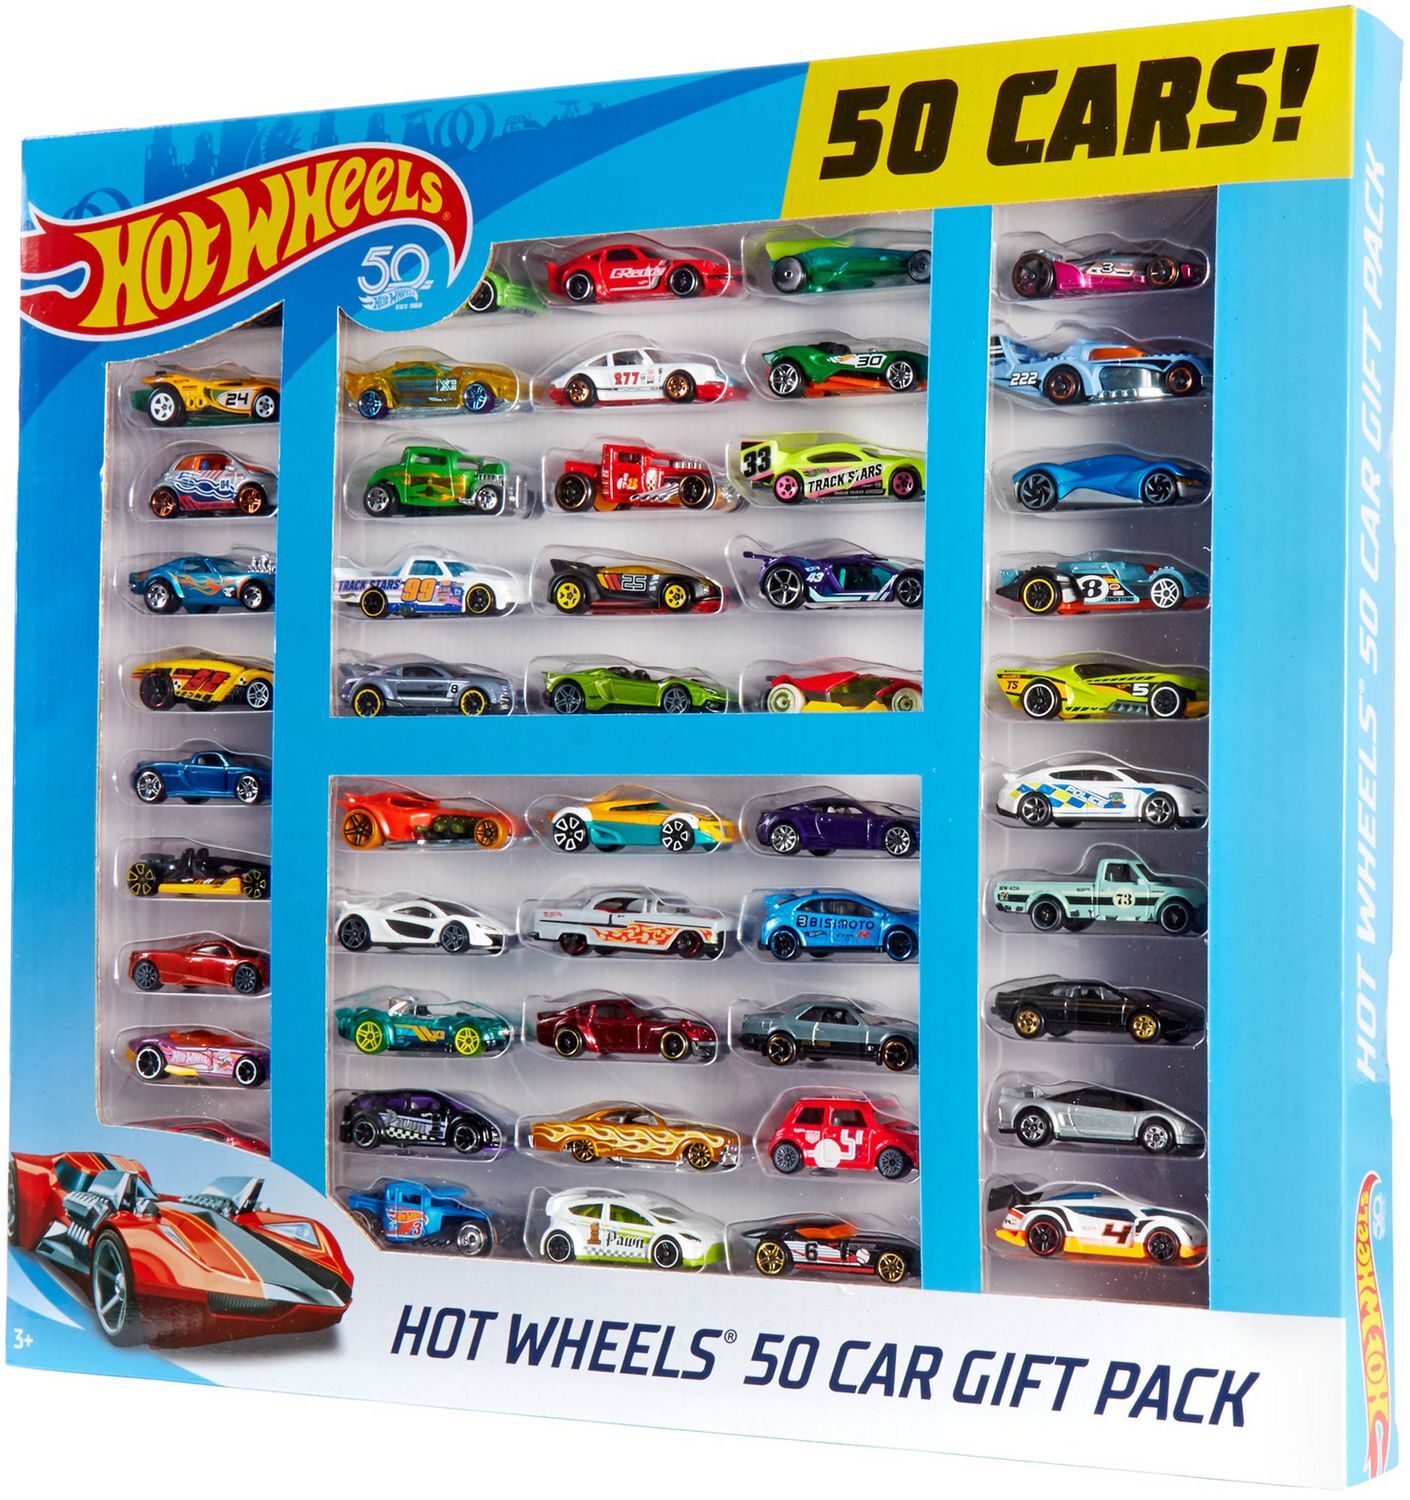 Hot Wheels Cars Collection: A Guide to Building Your Dream Ride